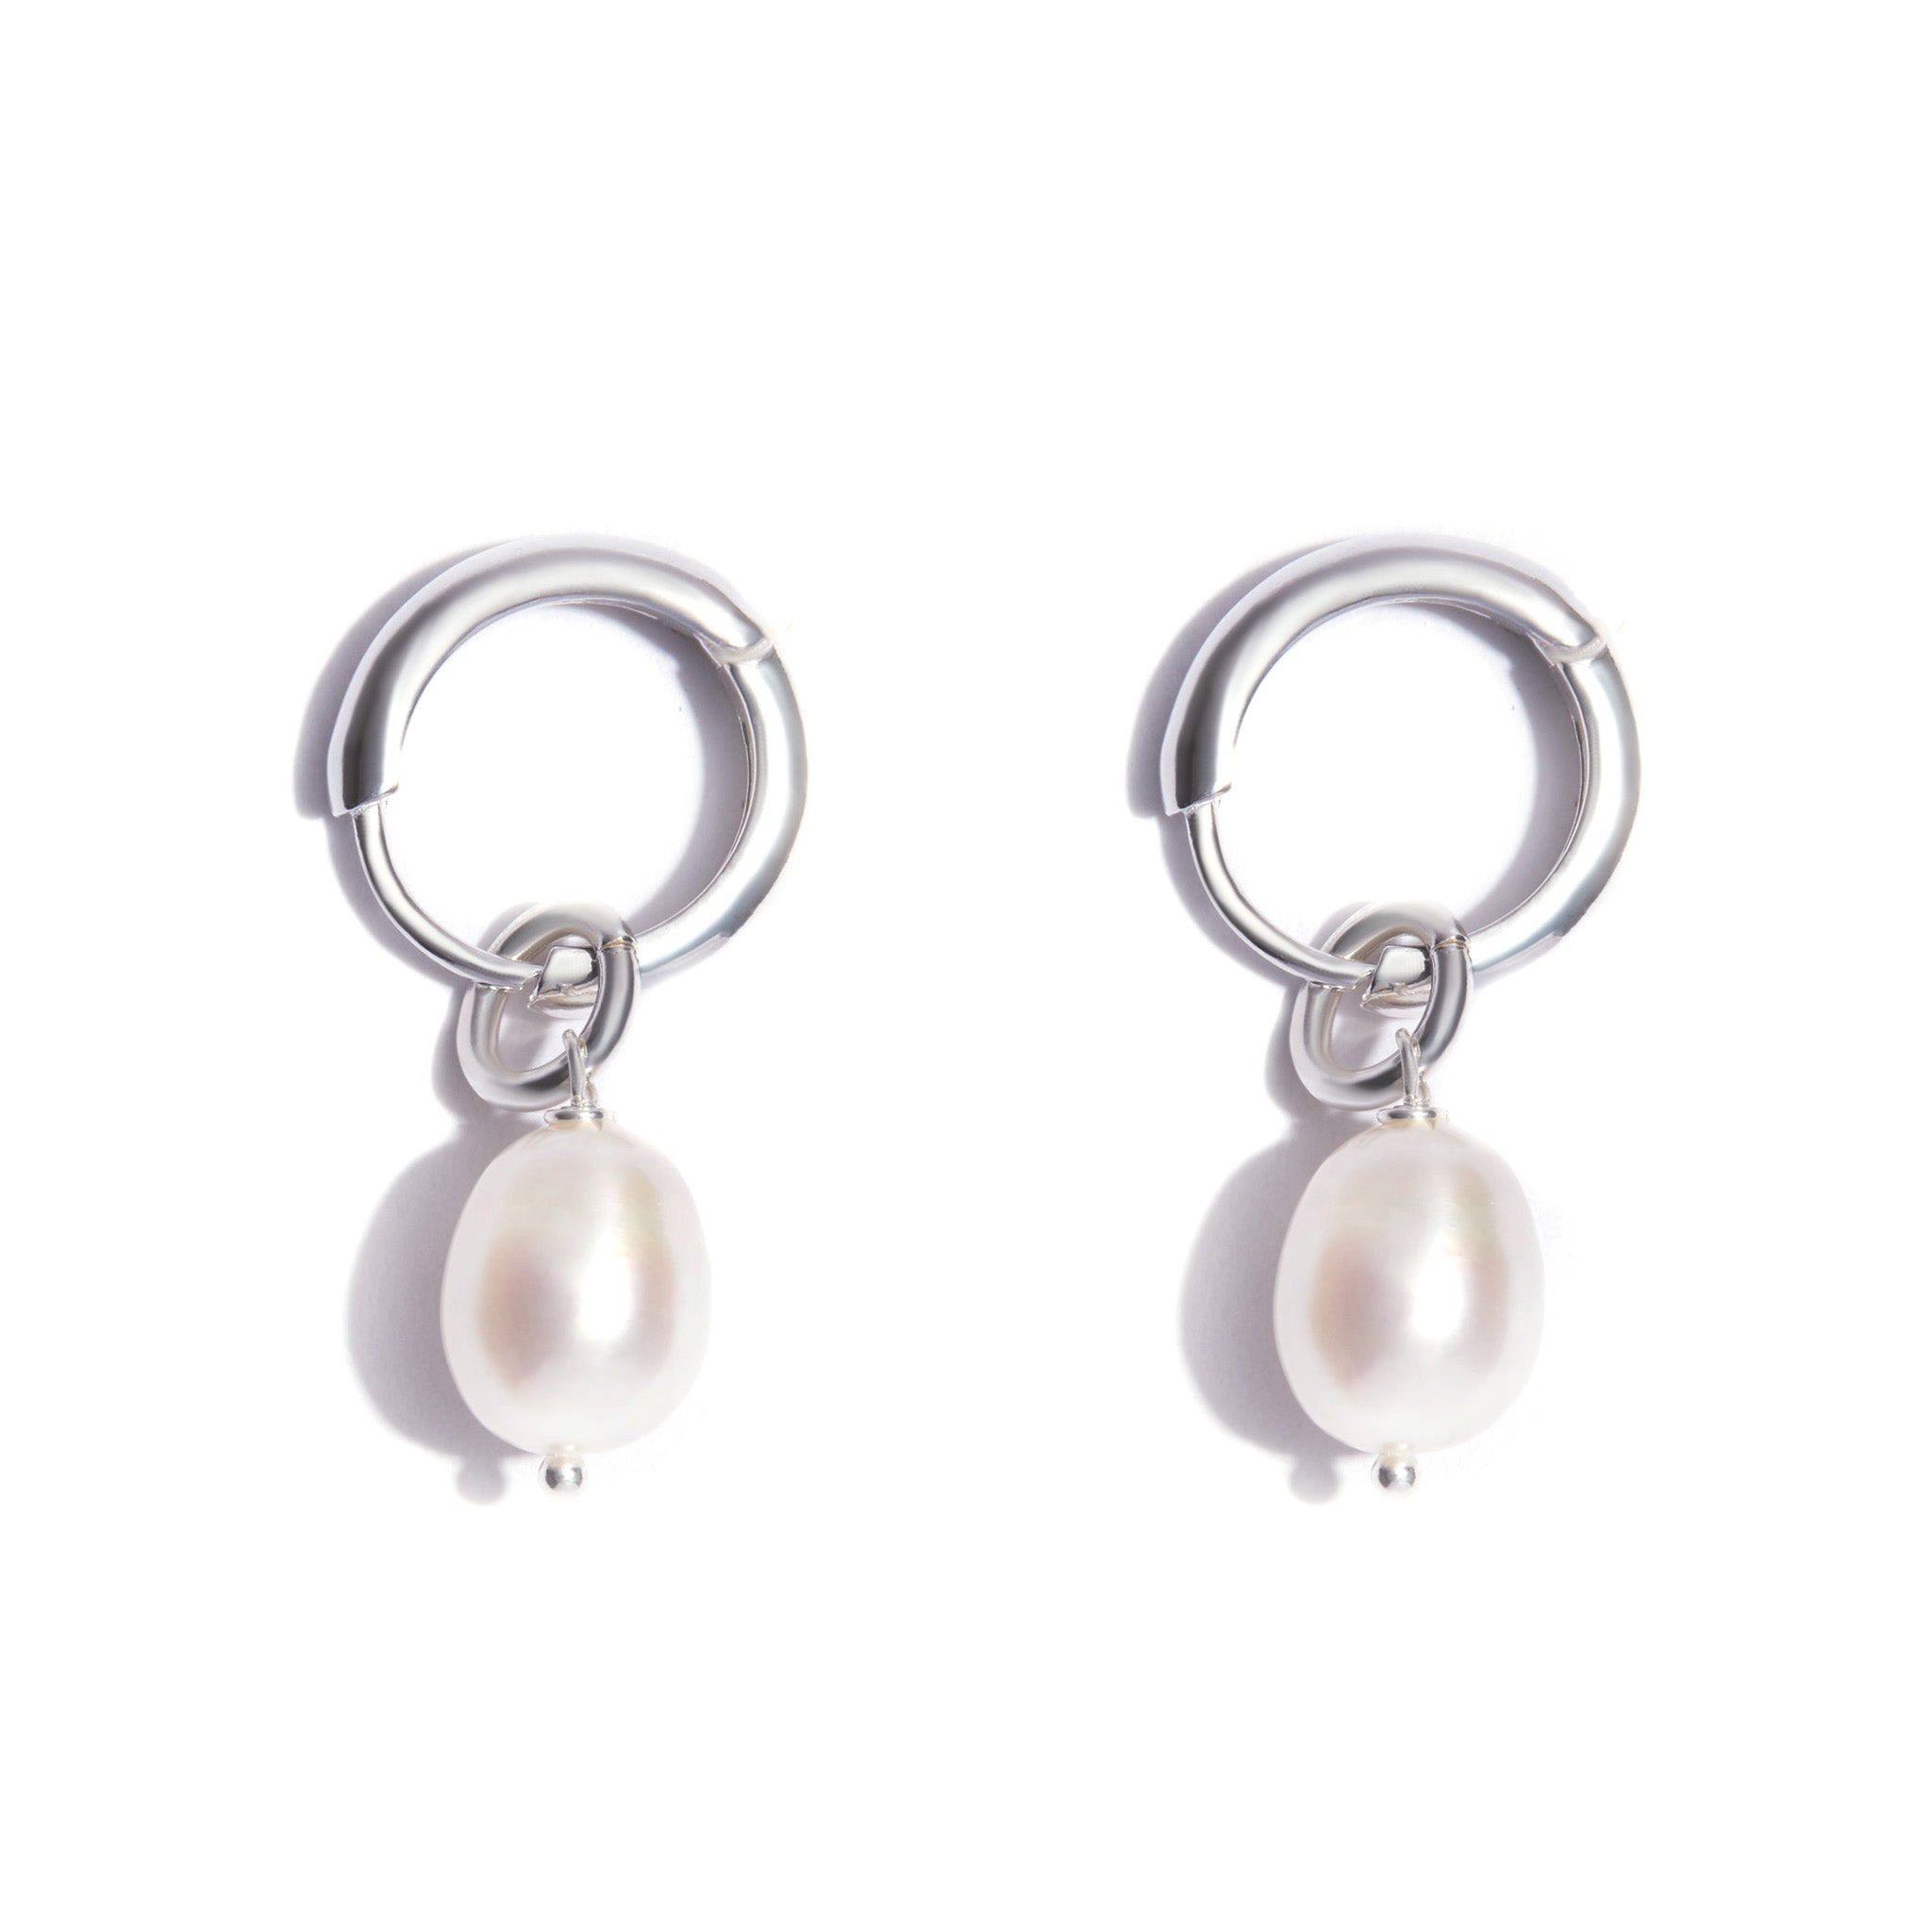 Sterling Silver Huggie Hoop Baroque Water Pearl Charm Earrings. Solid cast 10mm inside diameter hoops adorned with a single 10*8mm pearl. Suitable for all earlobes